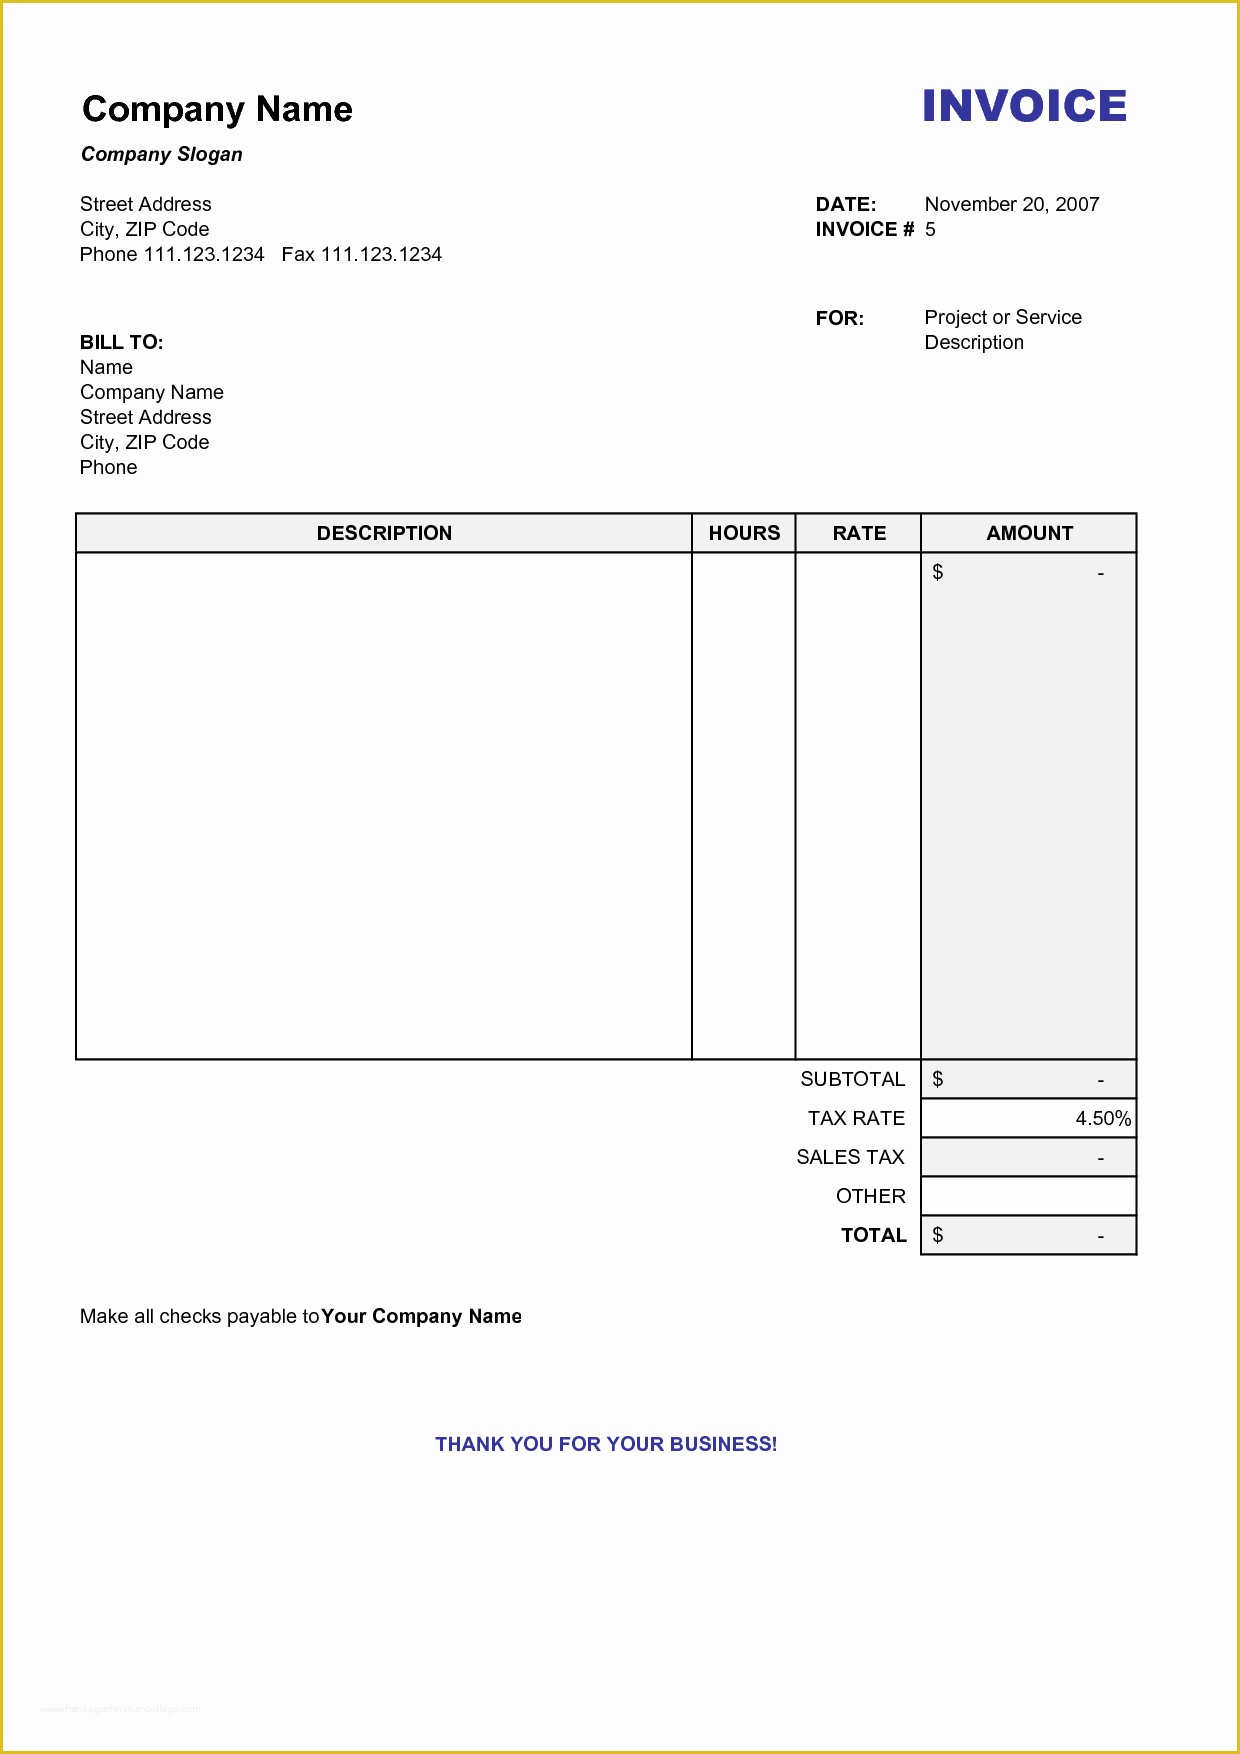 Fill In the Blank Invoice Template Free Of Best S Of Blank Invoice to Use Blank Invoice forms